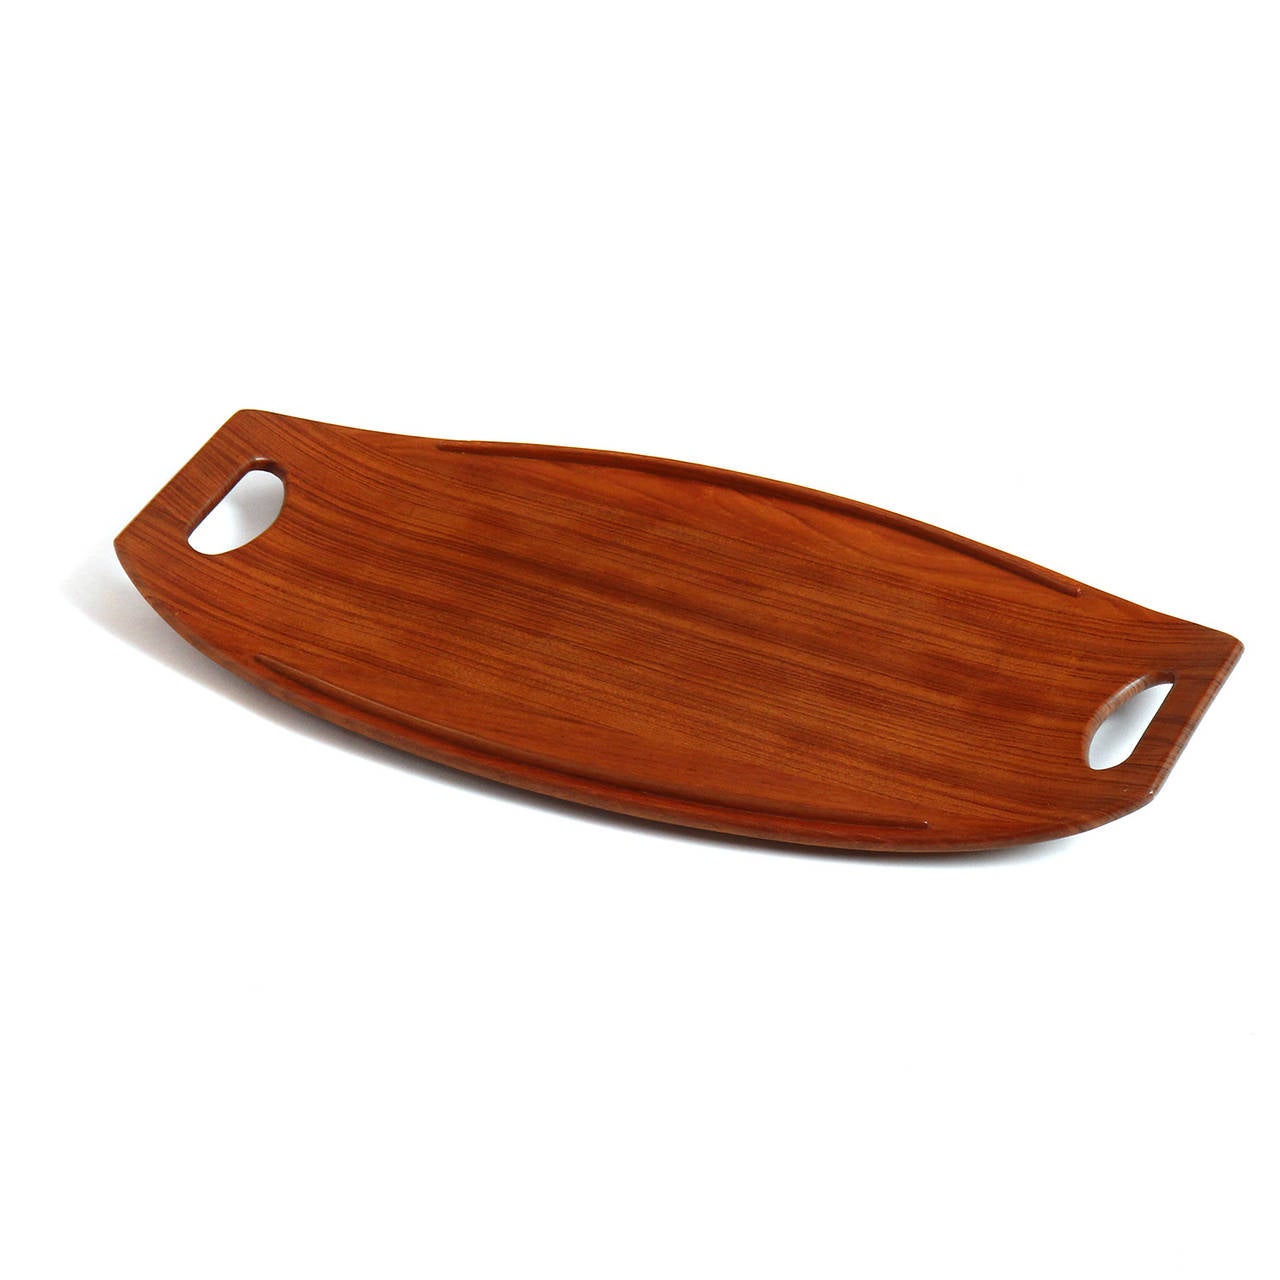 Mid-20th Century Teak Serving Tray by Jens Quistgaard